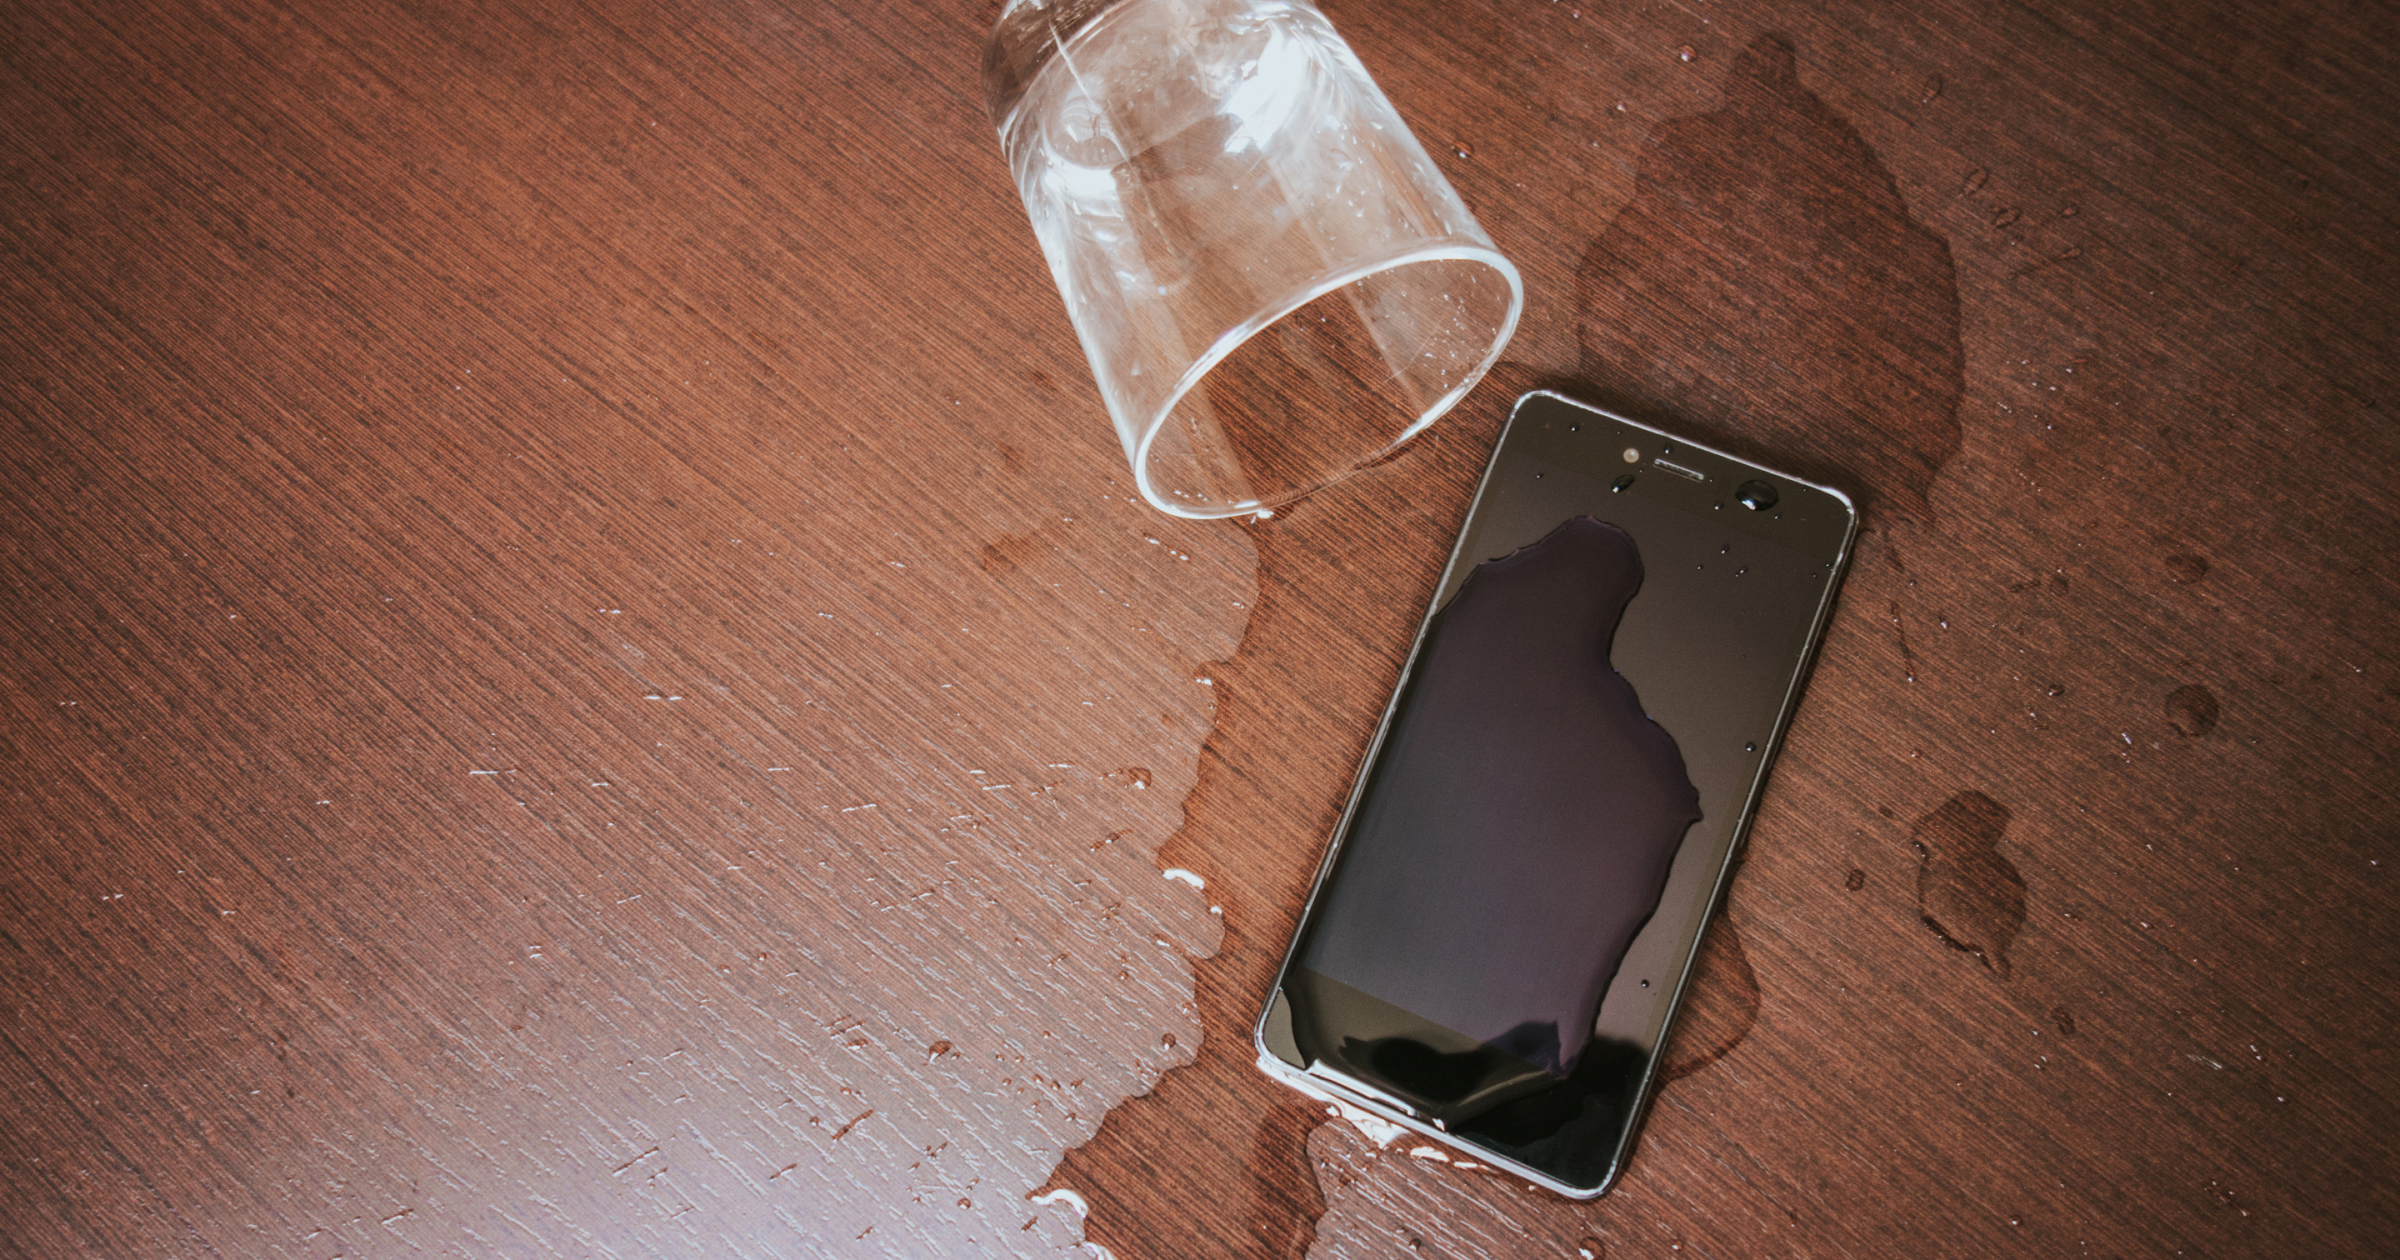 Cup spills water on phone